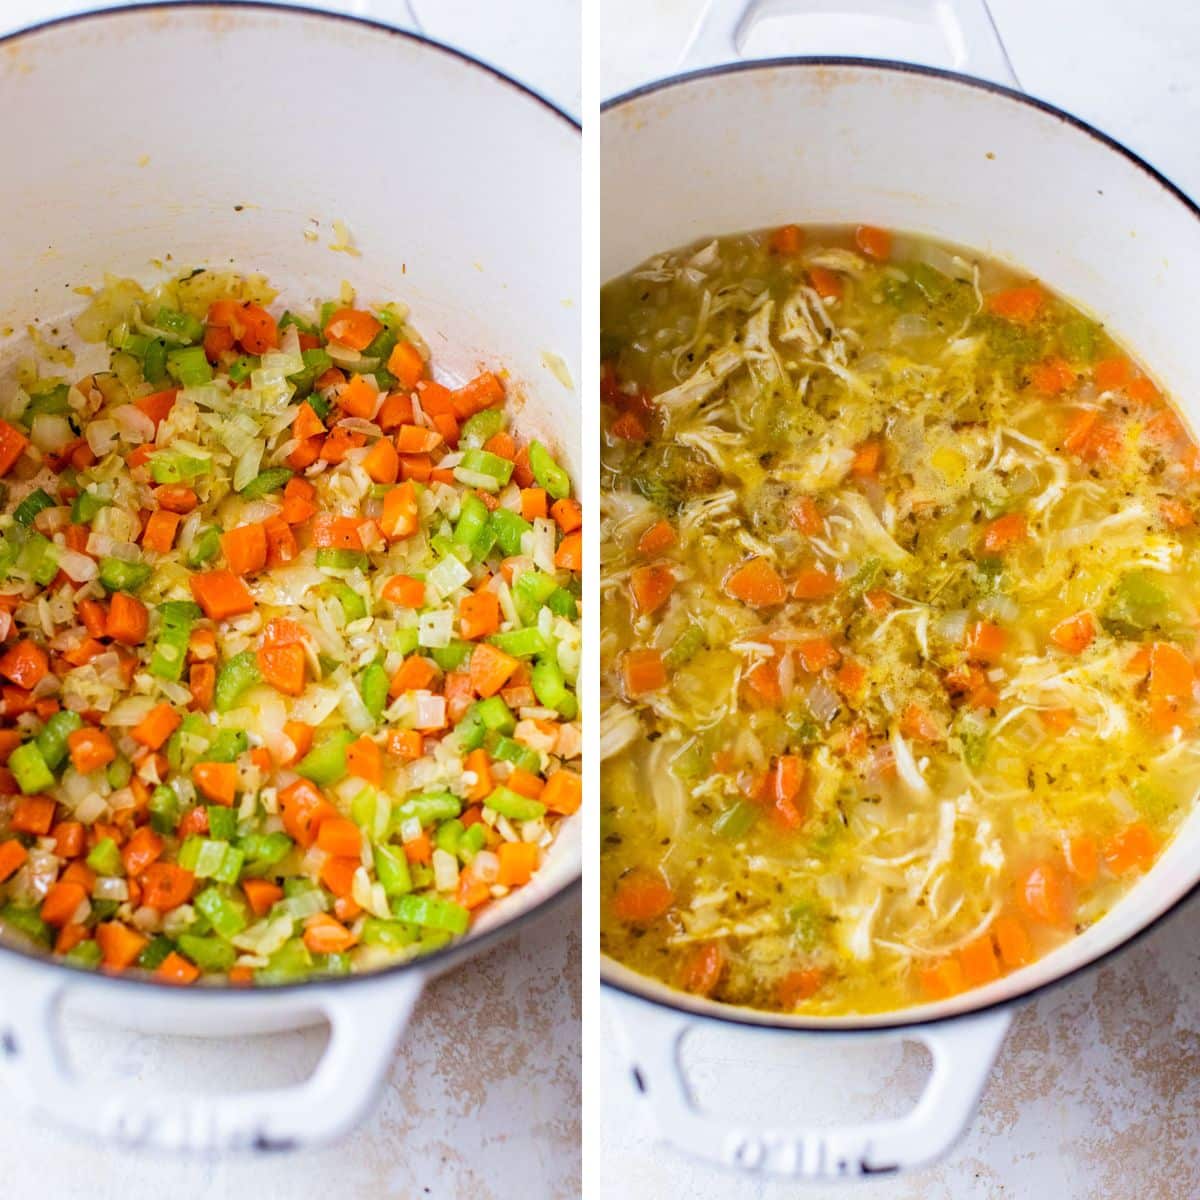 2 images: the left image shows vegetables cooking in a dutch oven and the right image shows the vegetables mixed with broth and chicken